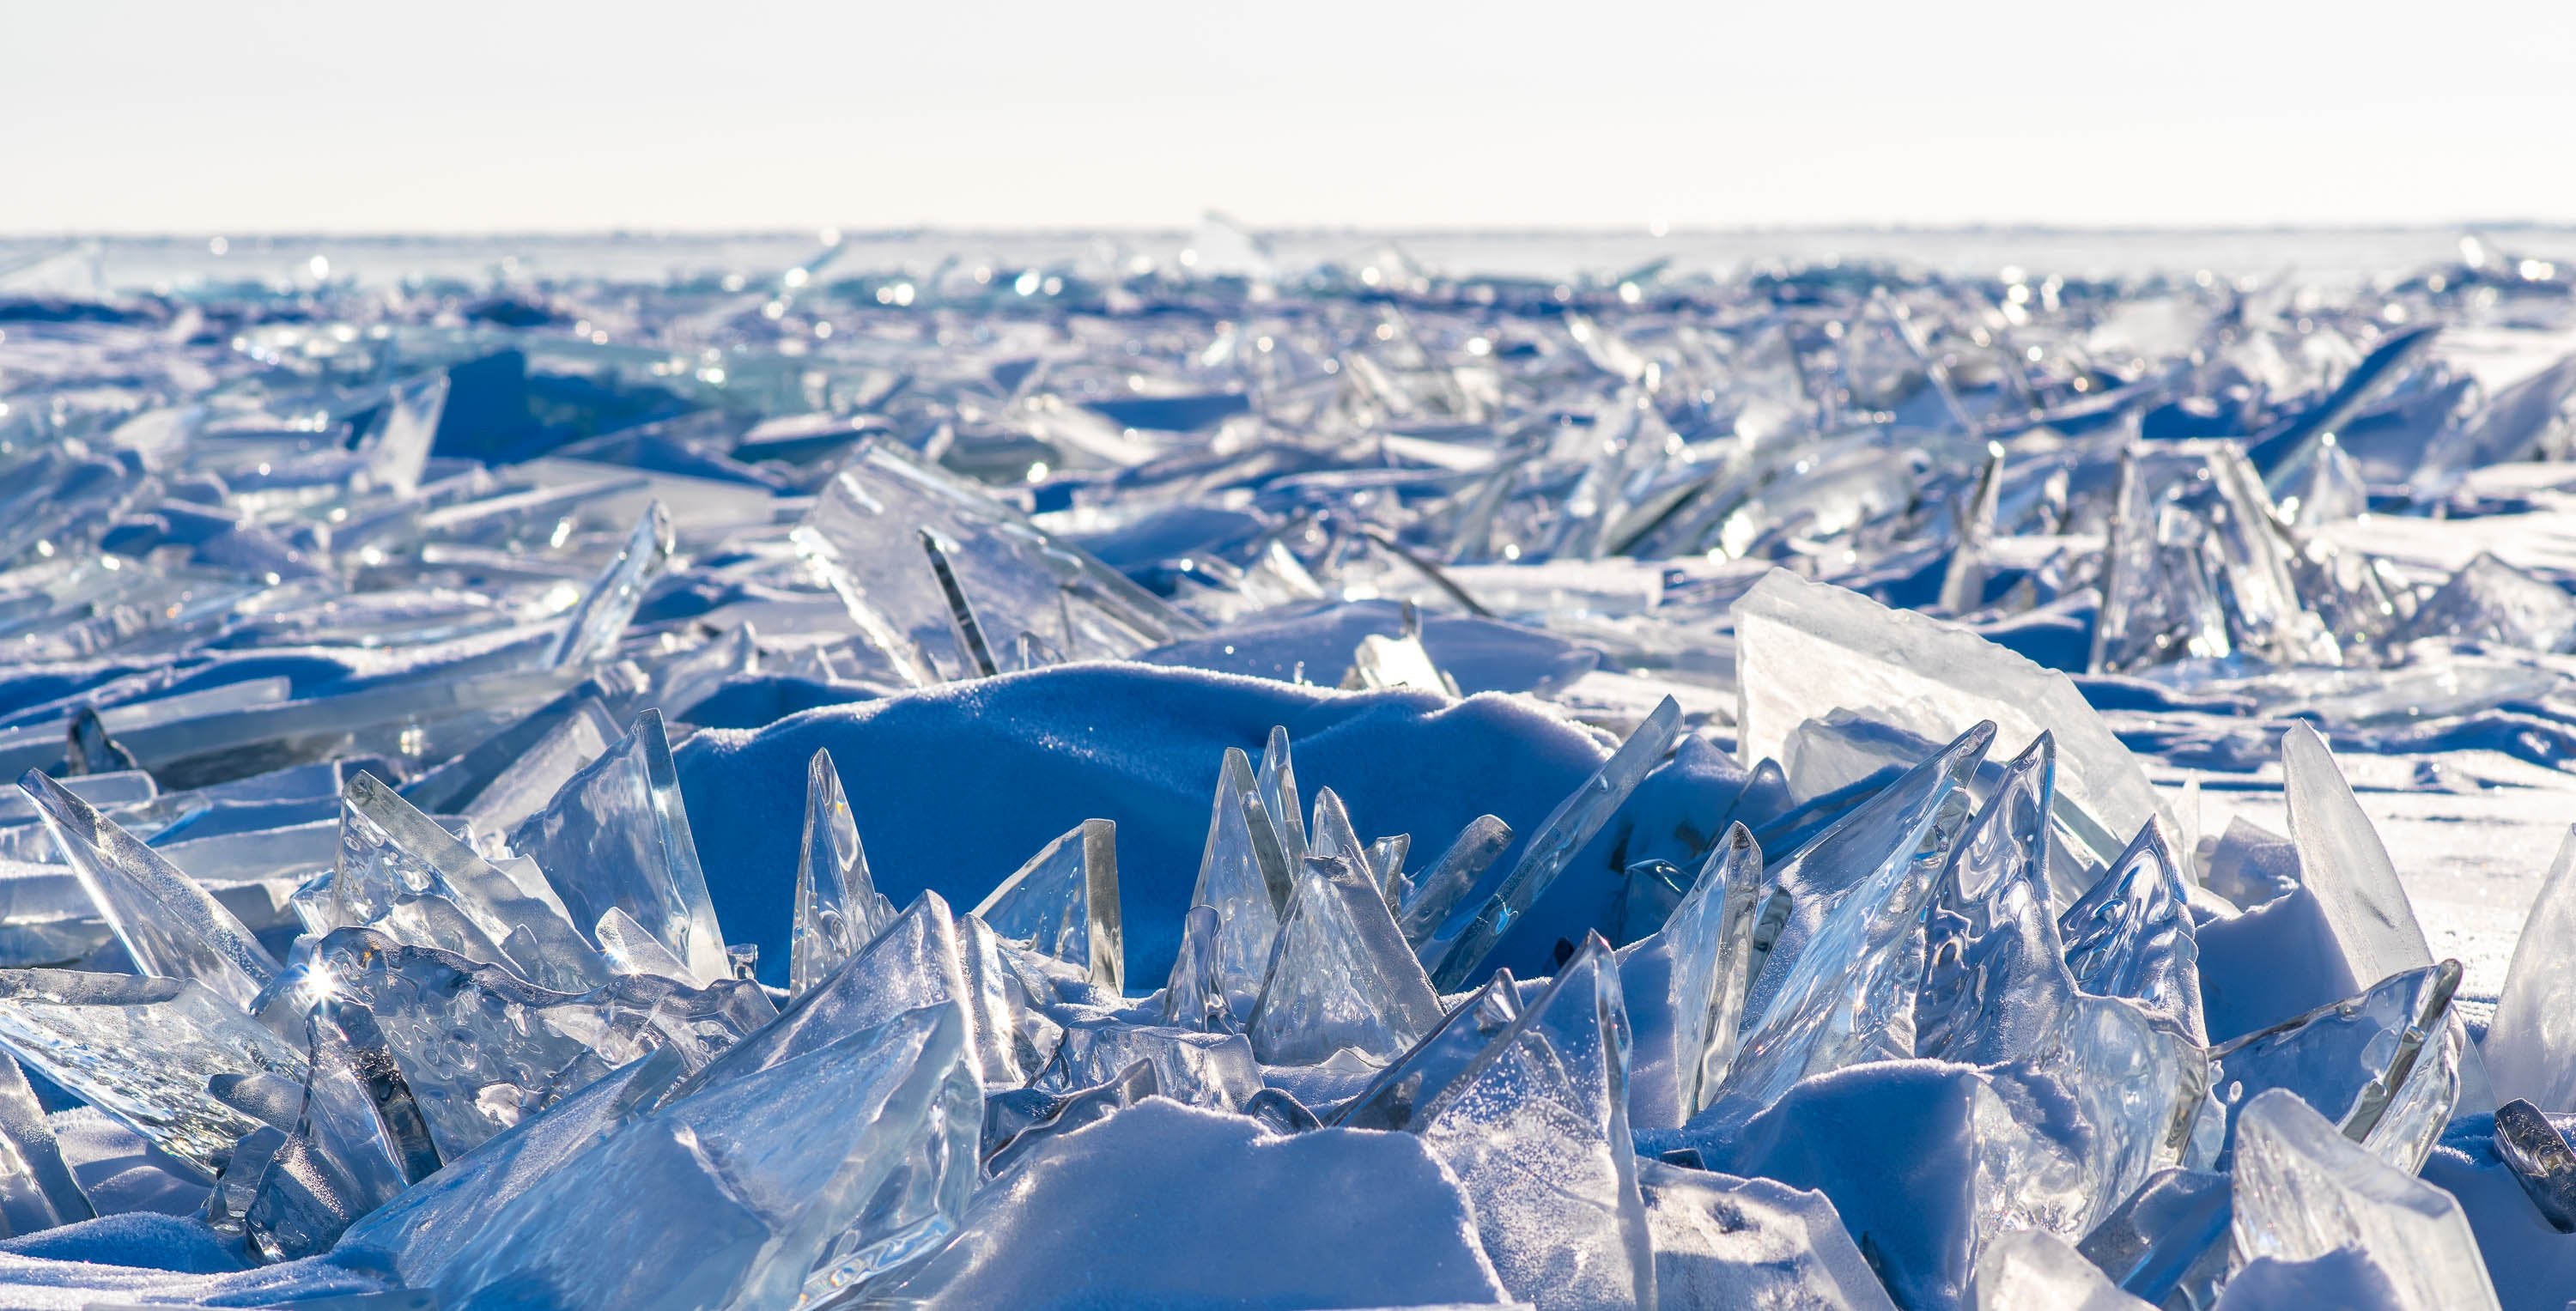 Crystalline sharp ice pieces on the ground in a very large area, Lake Baikal #7, Siberia, Russia